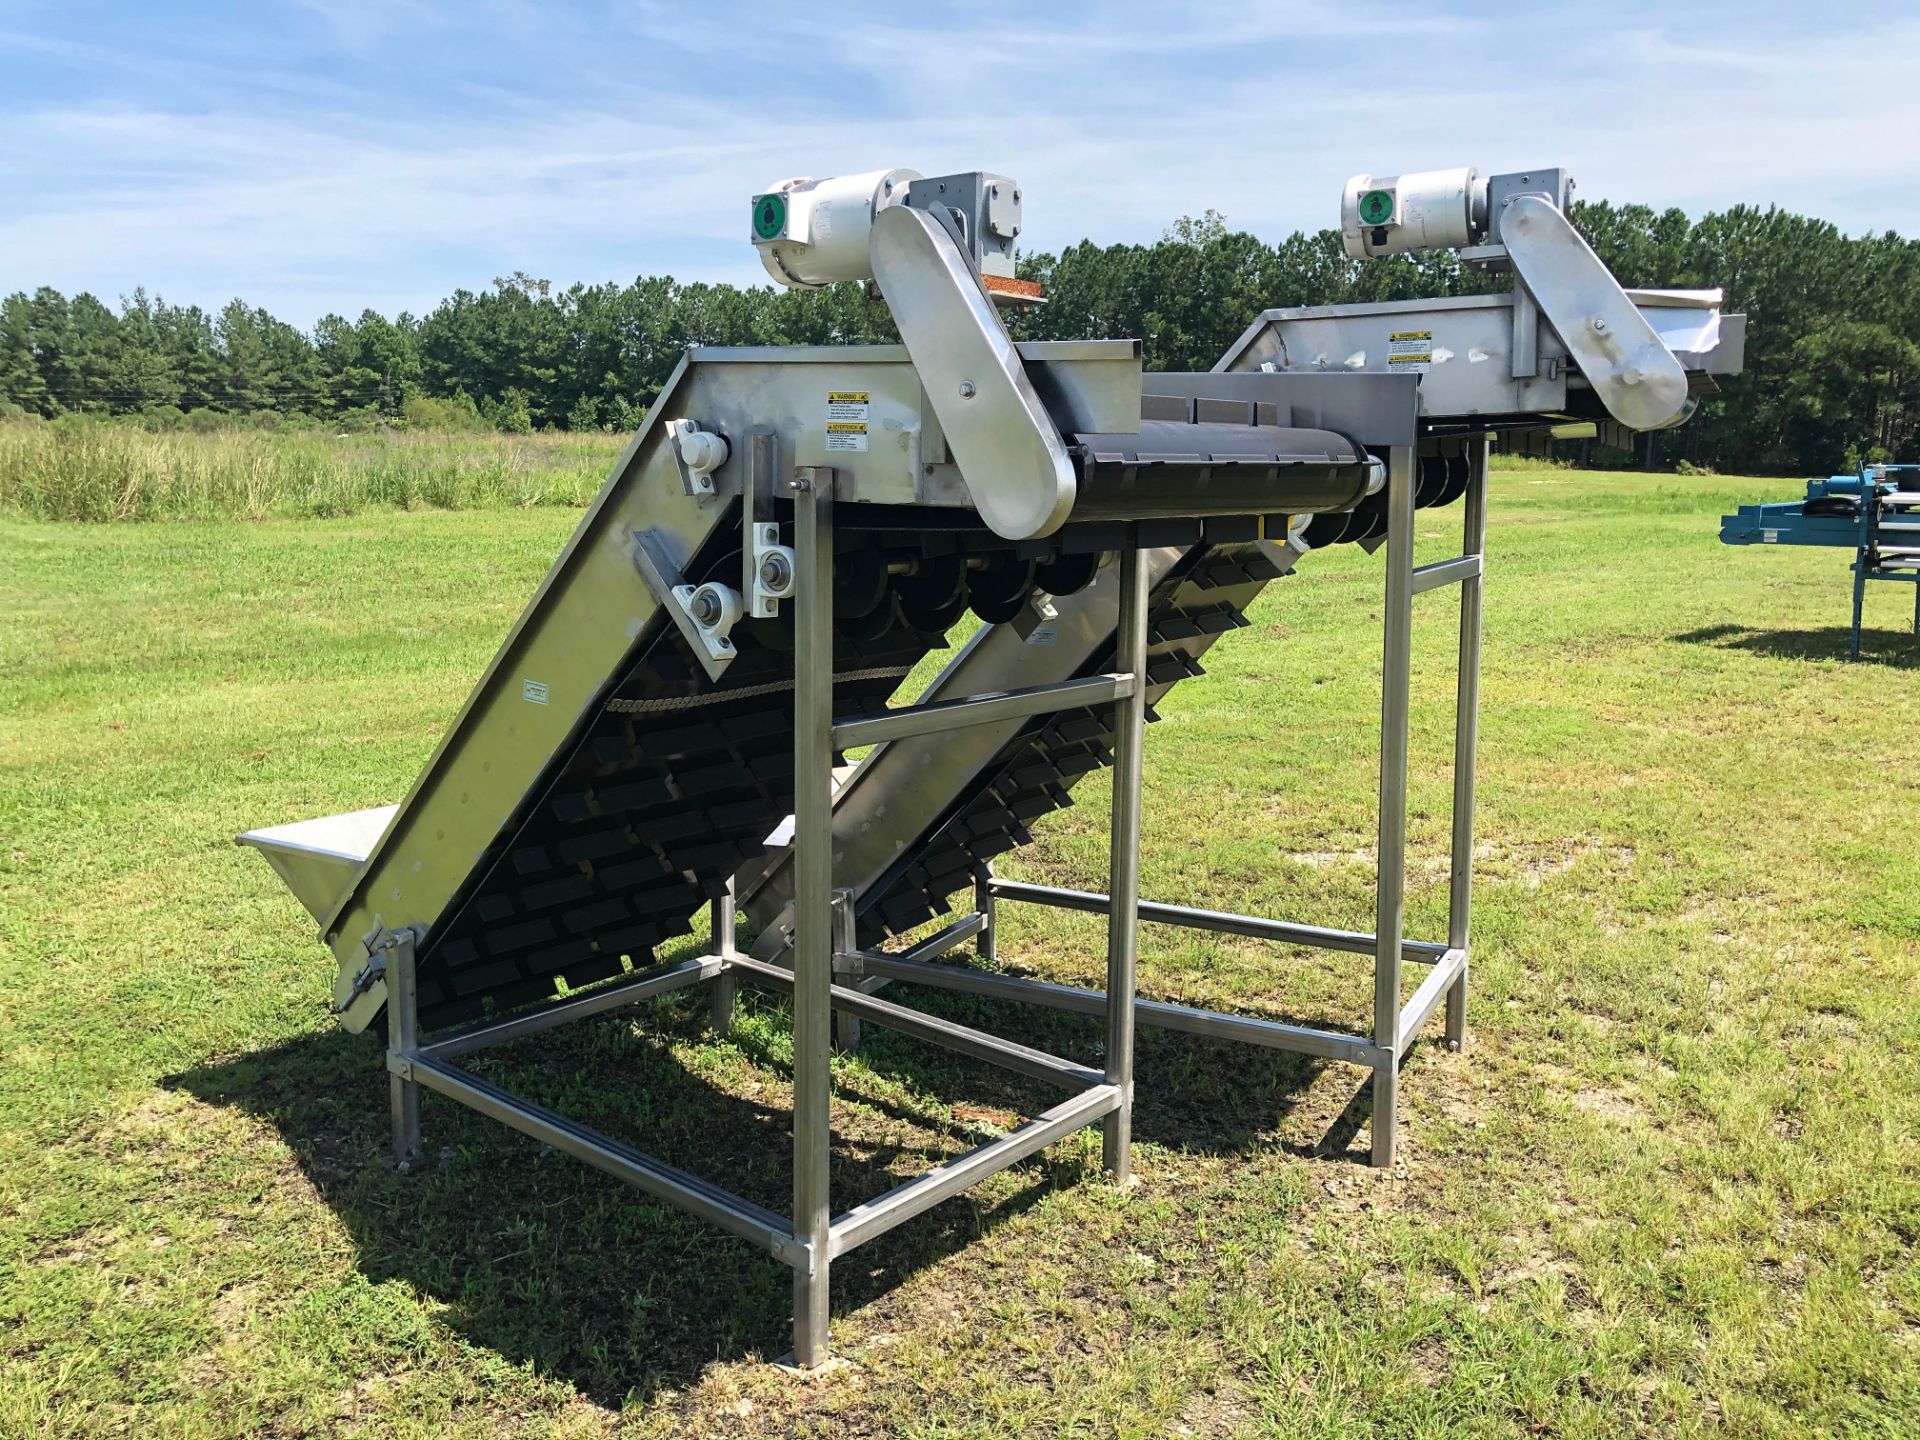 (2) Inclined Material Processing Conveyors Rigging Price: $250